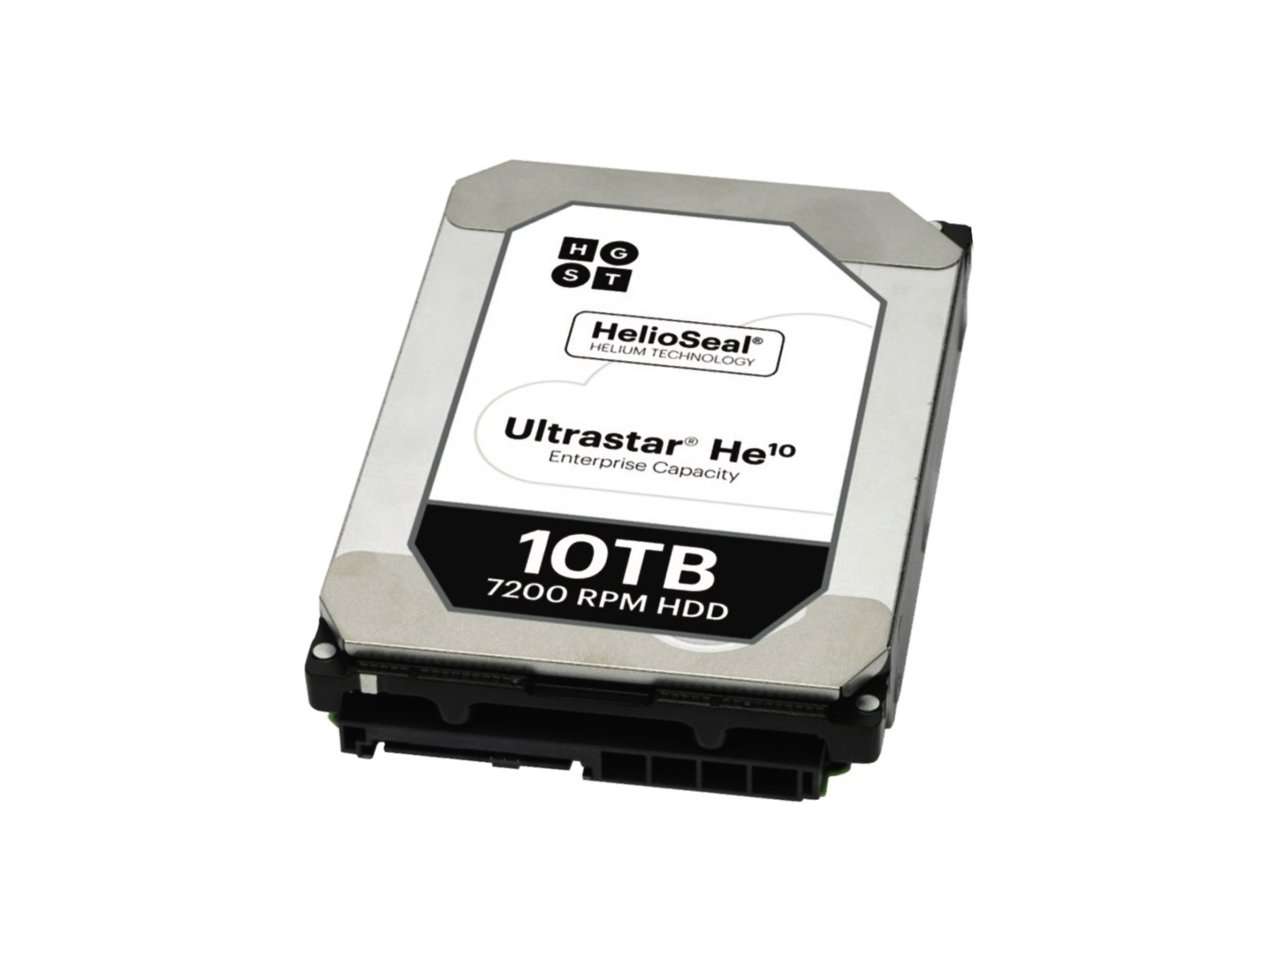 HGST Ultrastar He10 0F27359 HUH721008AL5205 8TB 7.2K RPM SAS 12Gb/s 512e 256MB Cache 3.5" TCG FIPS Manufacturer Recertified HDD